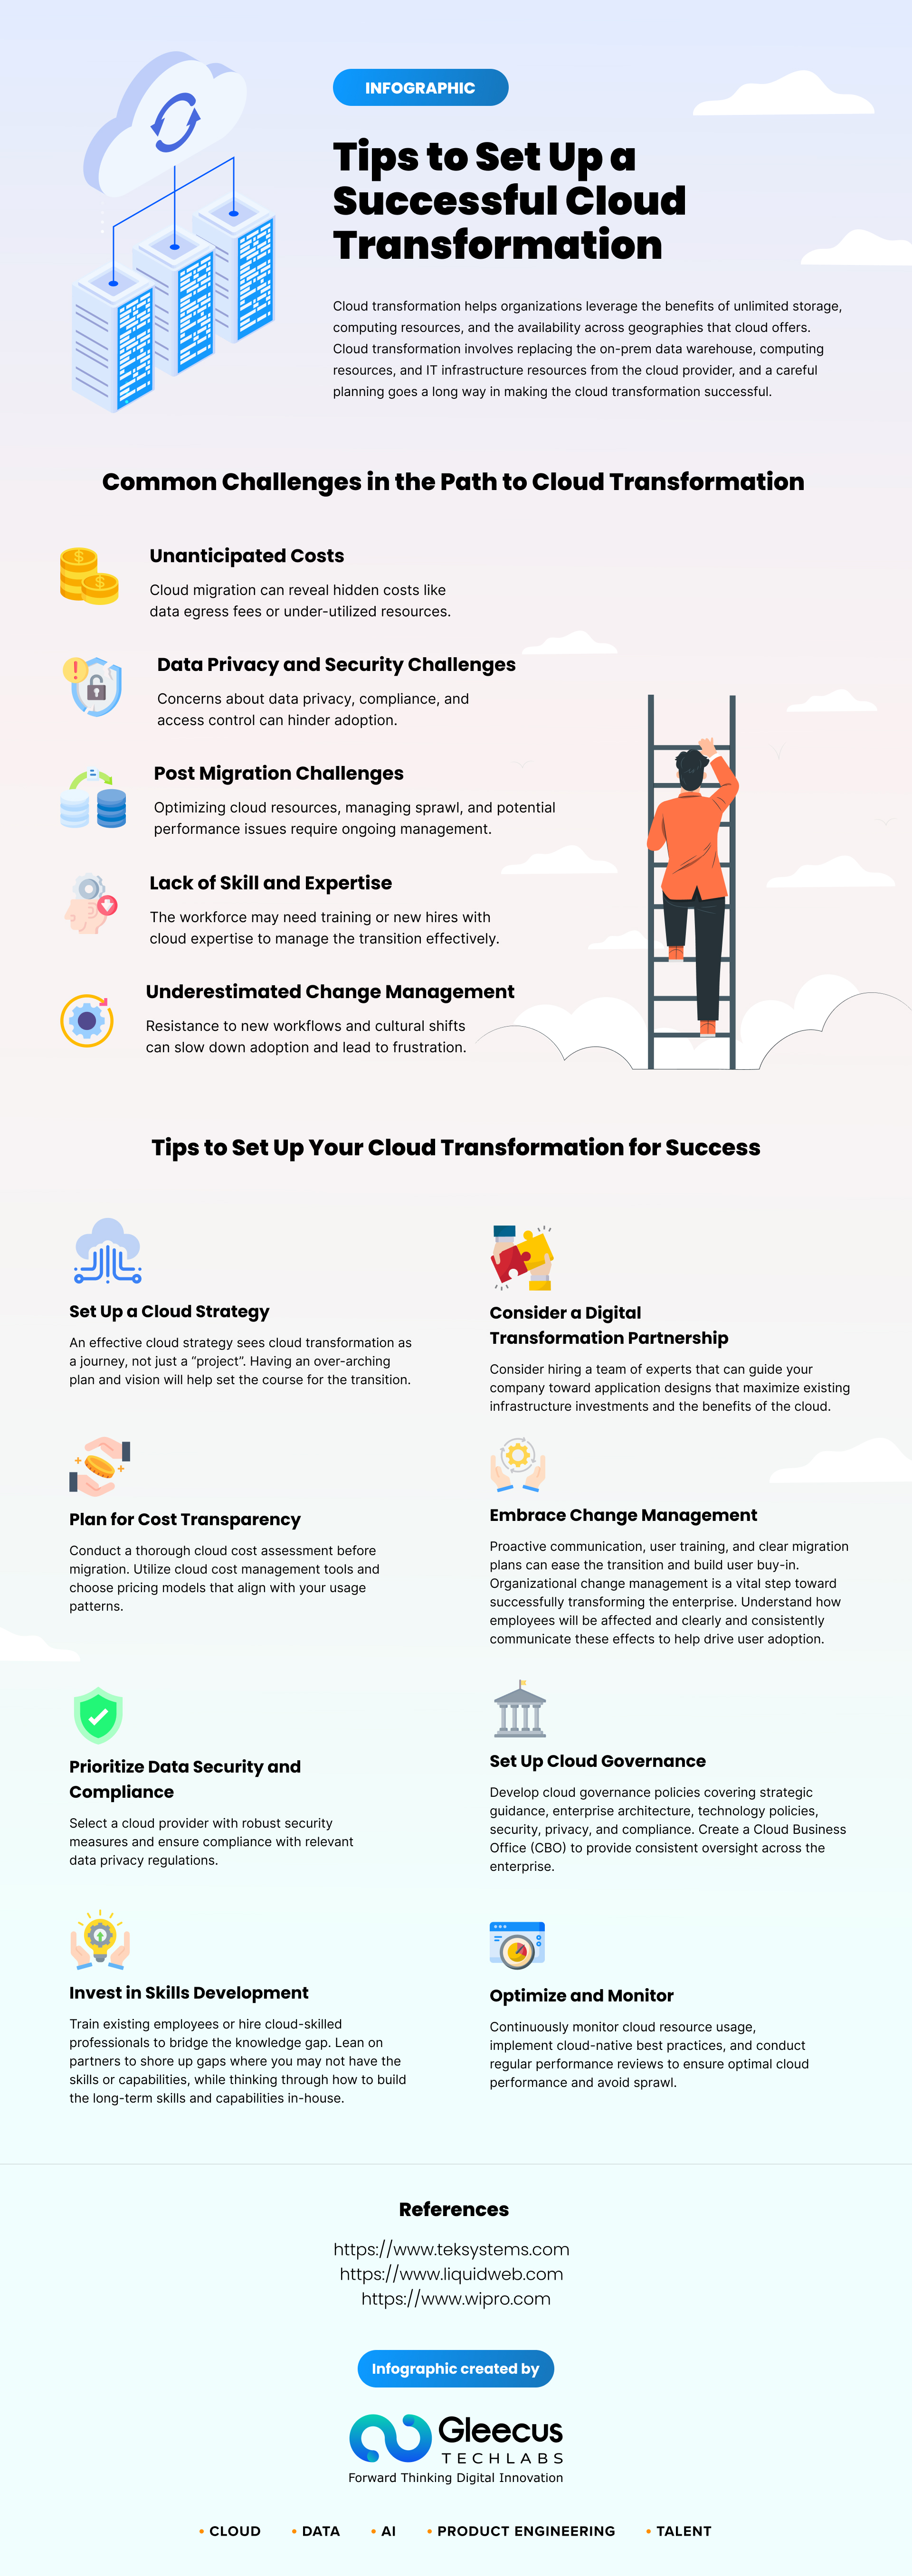 Cloud transformation is a necessity for today’s business to stay competitive. Transformation demands a lot of change in existing practices and adoption to new technologies and processes. Setting up a successful transformation involves active participation of every stakeholder to be affected by the changes.  

This infographic shares important tips on achieving a successful cloud transformation.